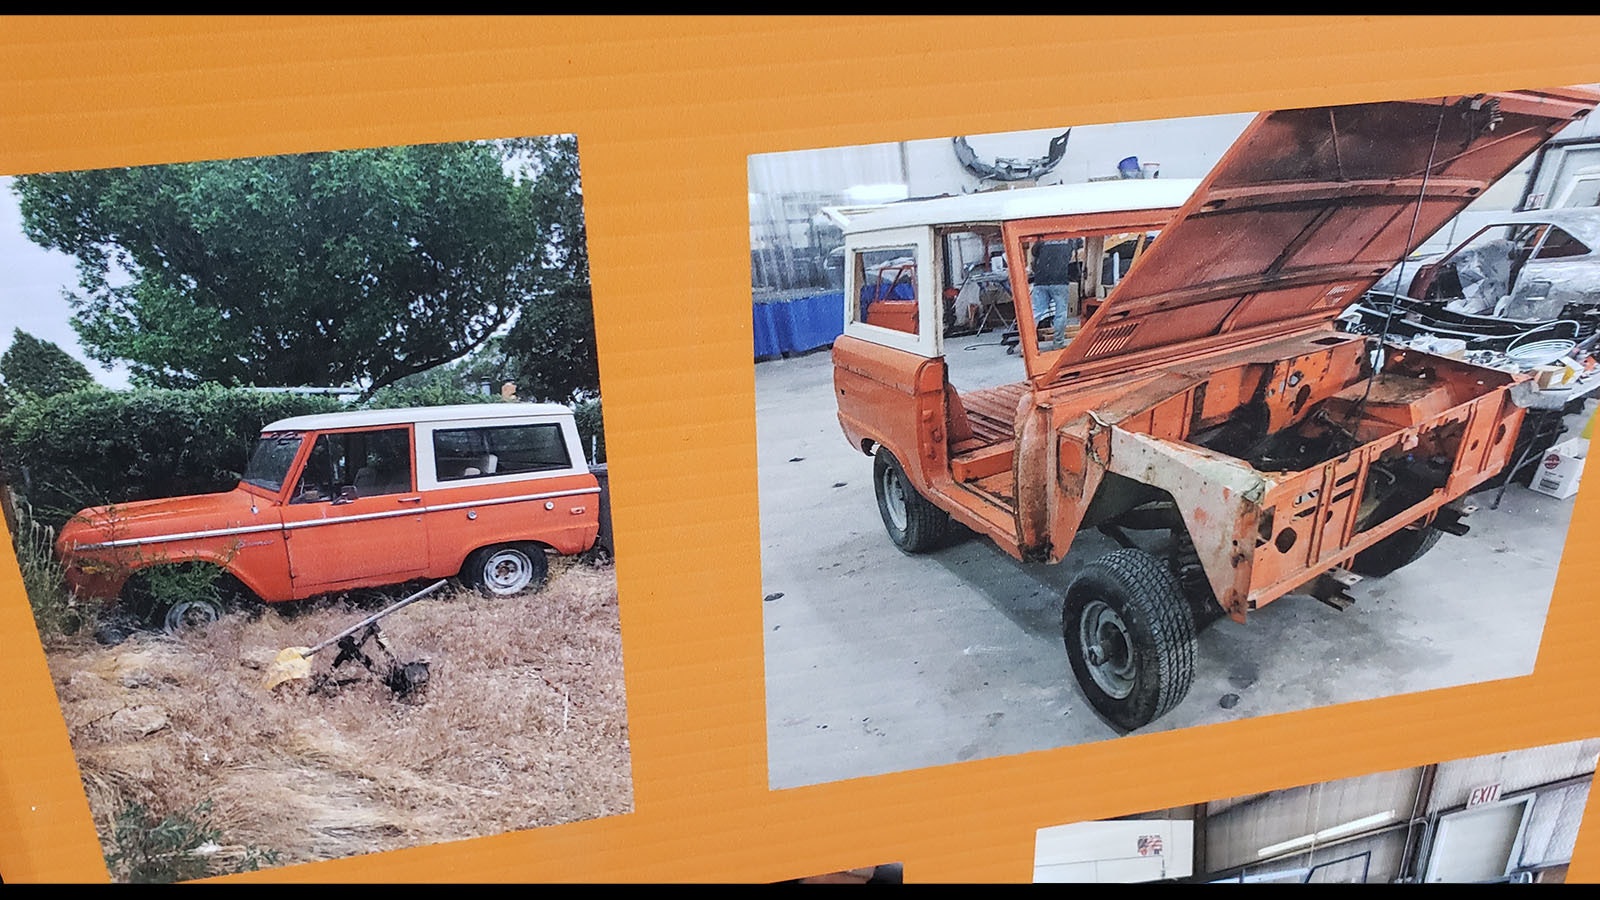 The condition of a 1976 Ford Bronco before Craig Rood rescued and restored it.